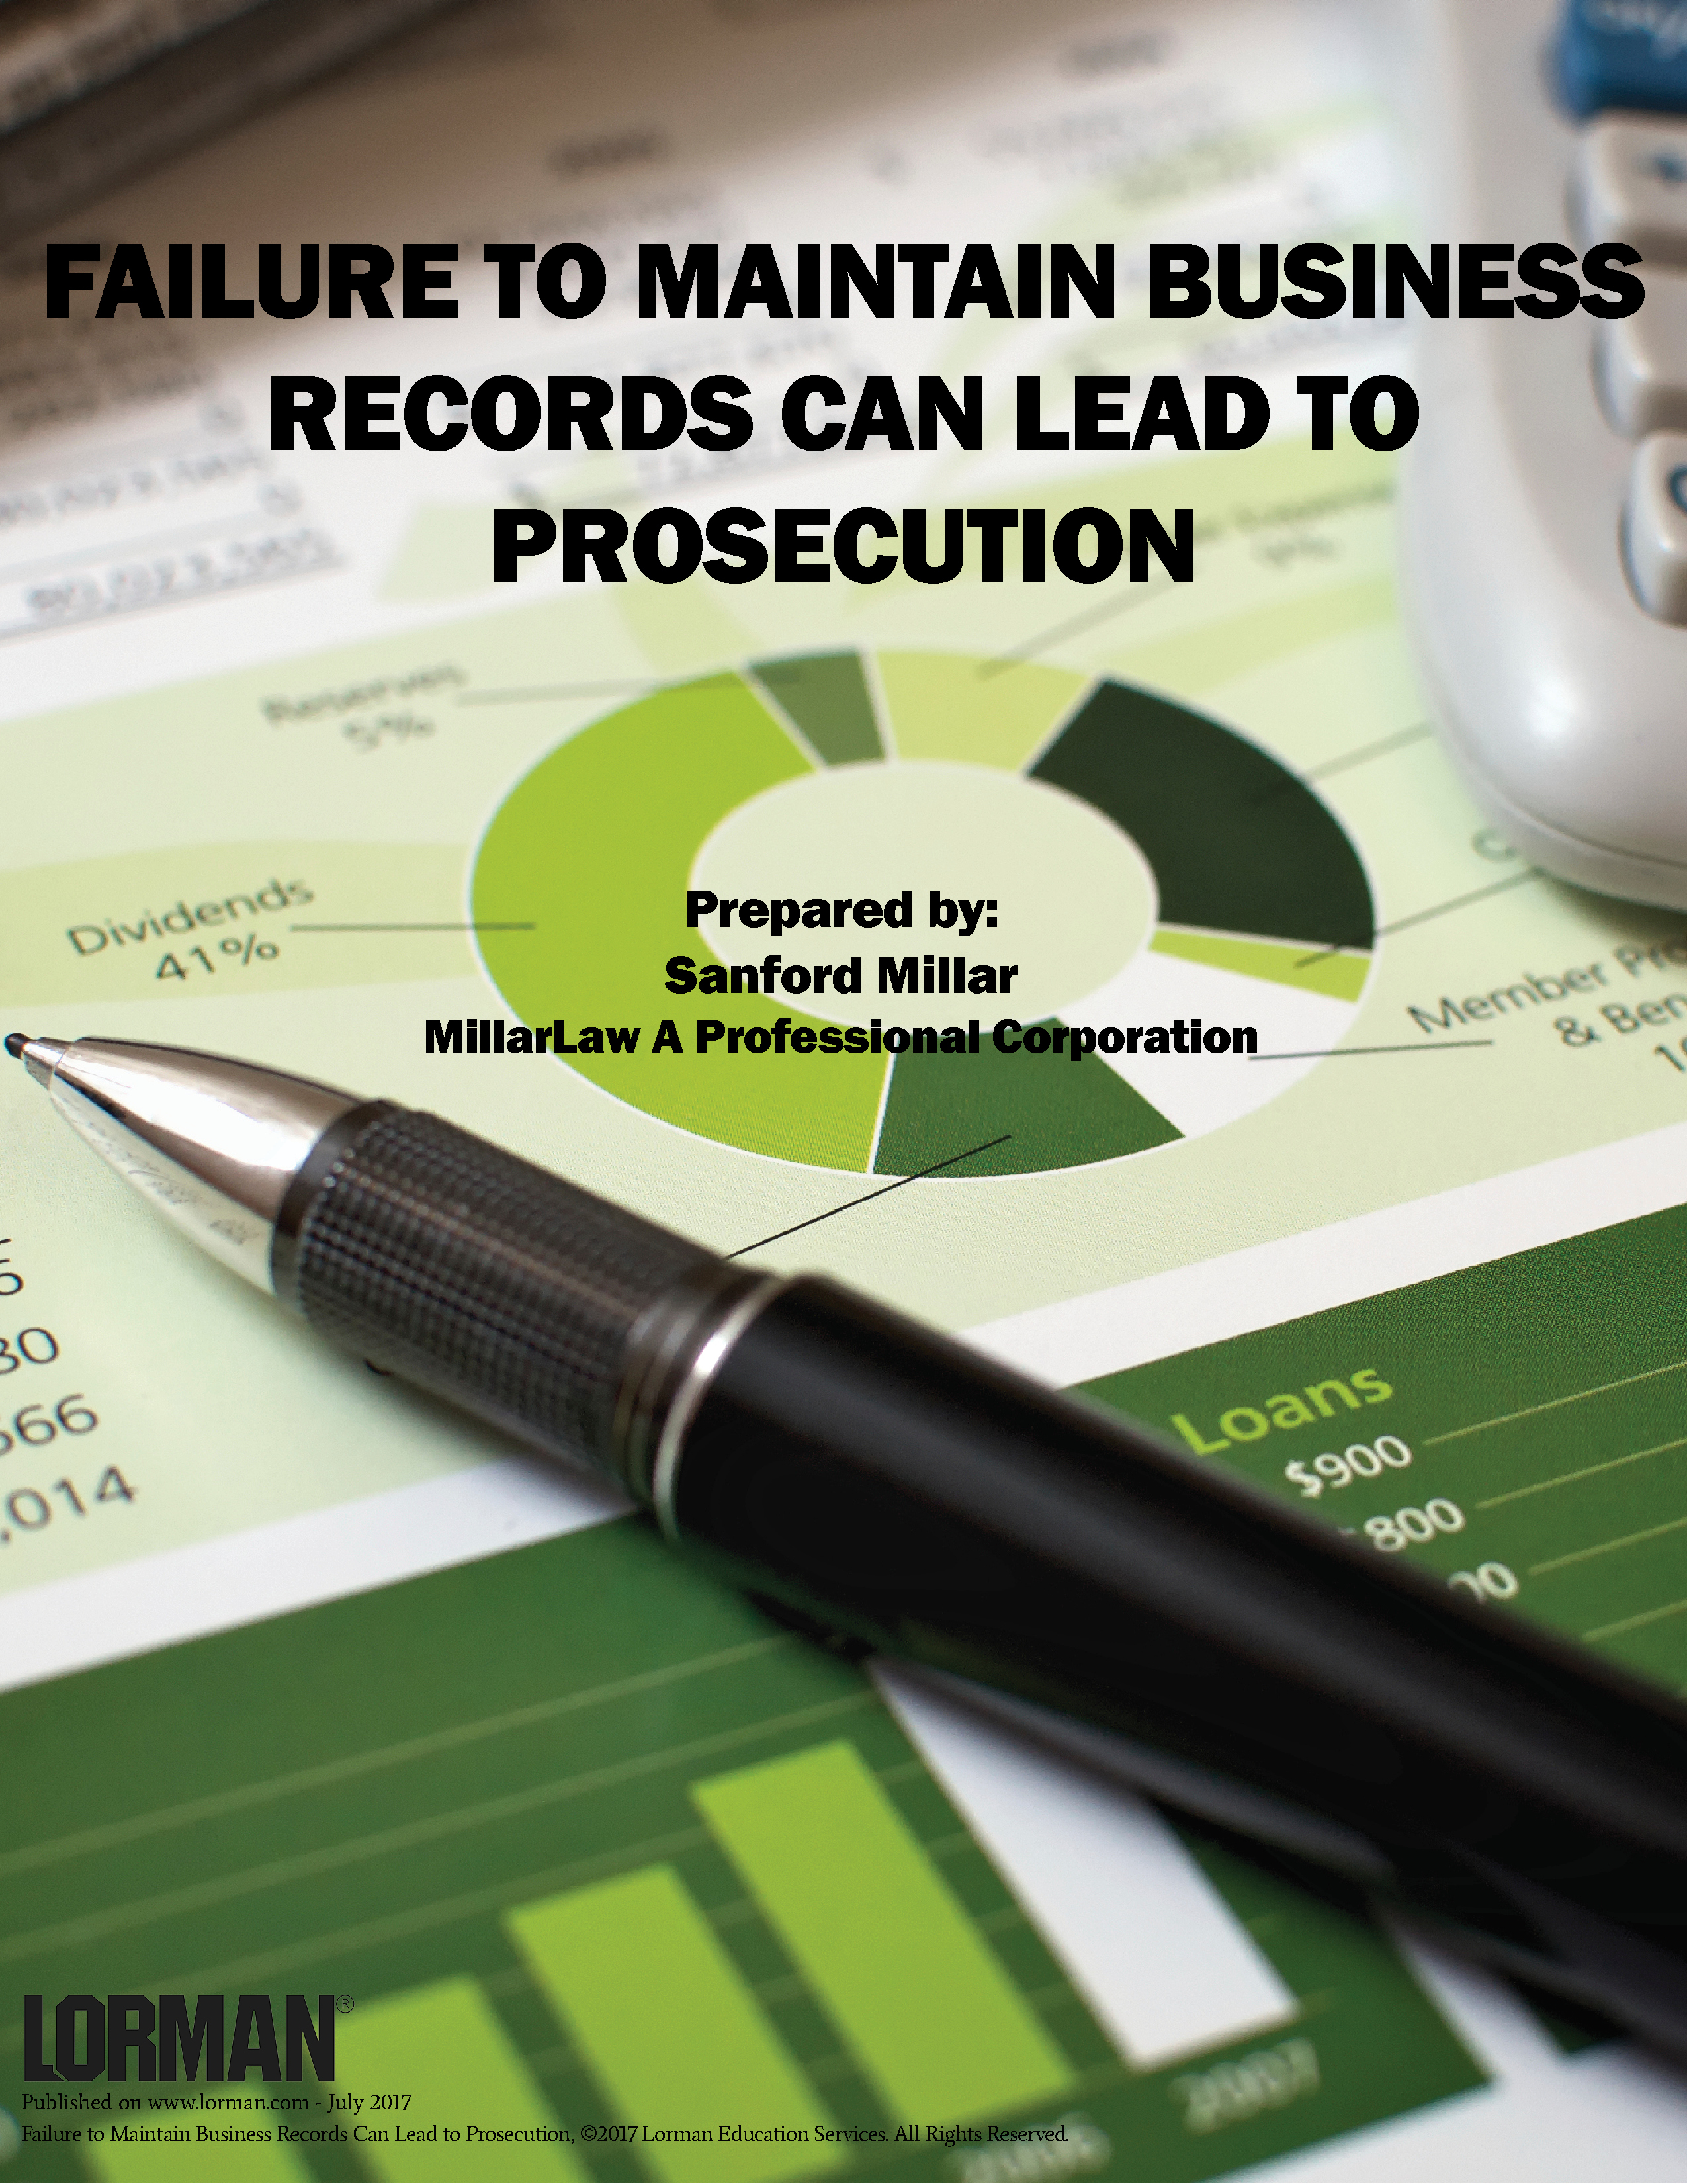 Failure to Maintain Business Records Can Lead to Prosecution